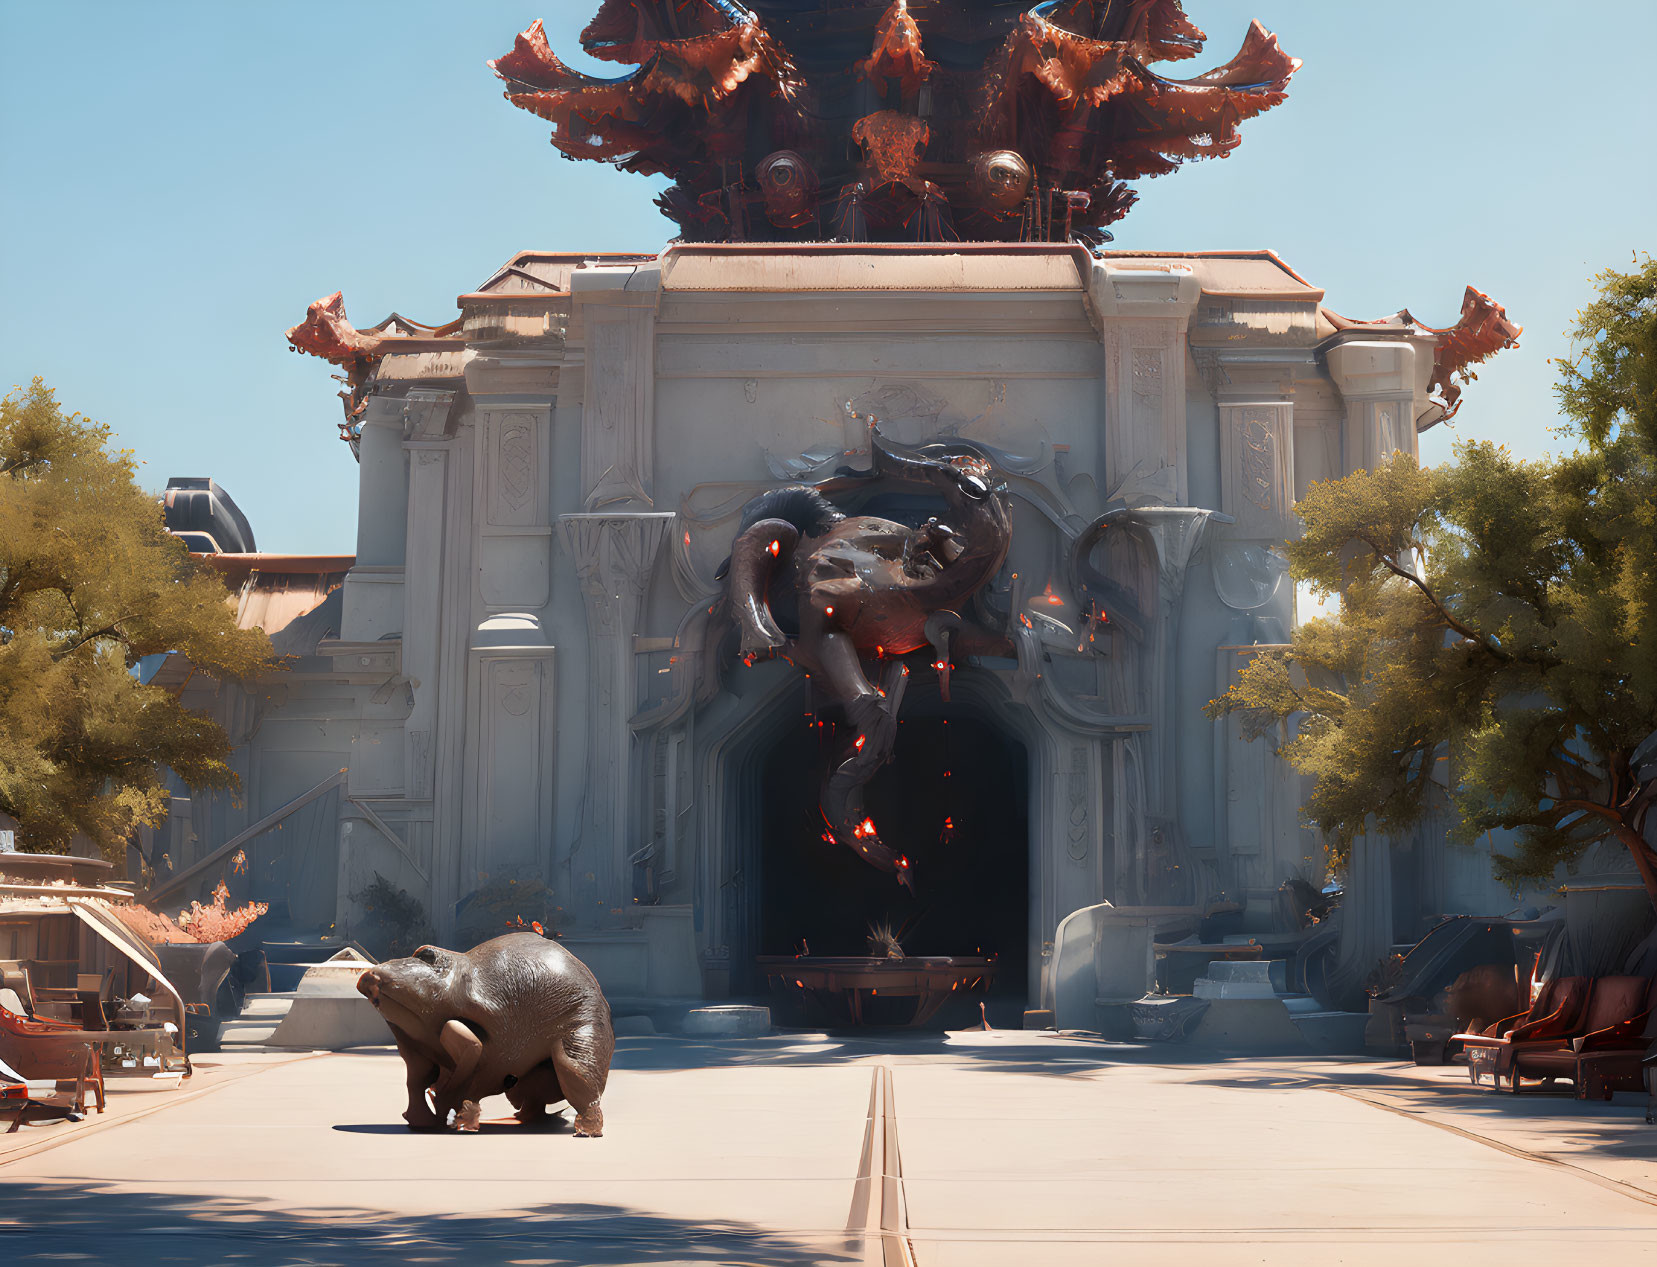 Majestic temple with beastly statues under clear sky